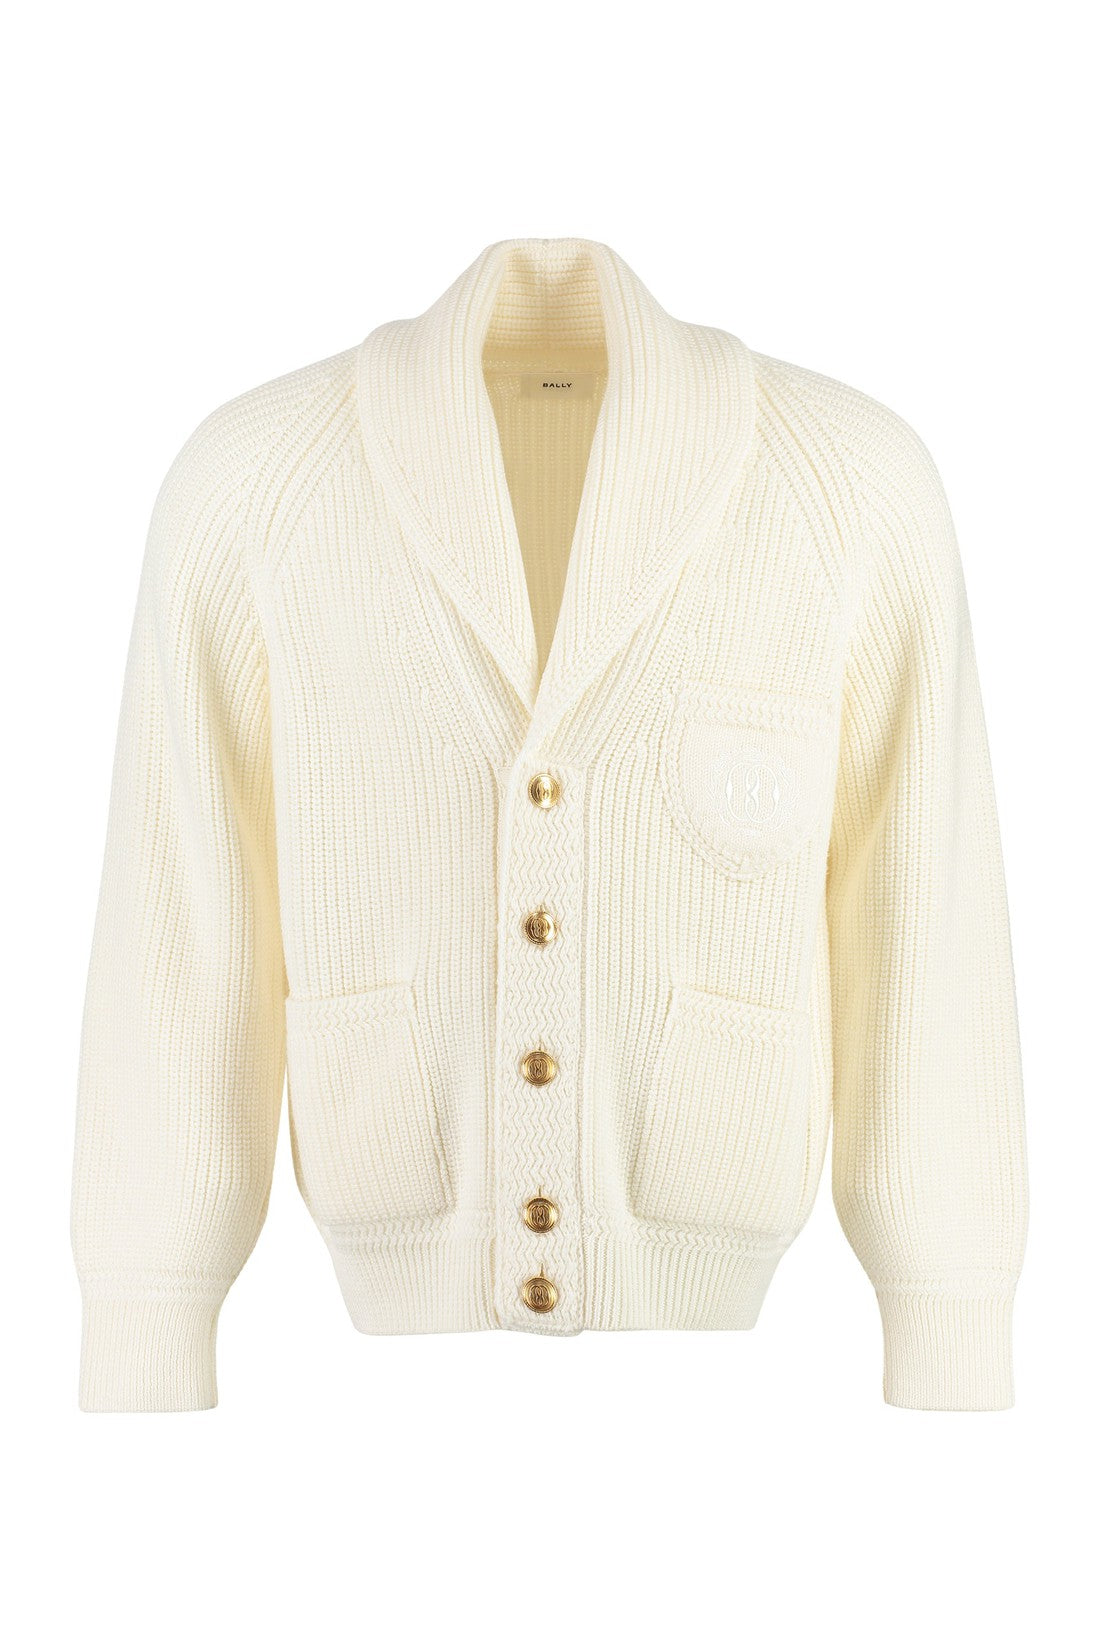 Bally-OUTLET-SALE-Merino wool cardigan with contrast buttons-ARCHIVIST